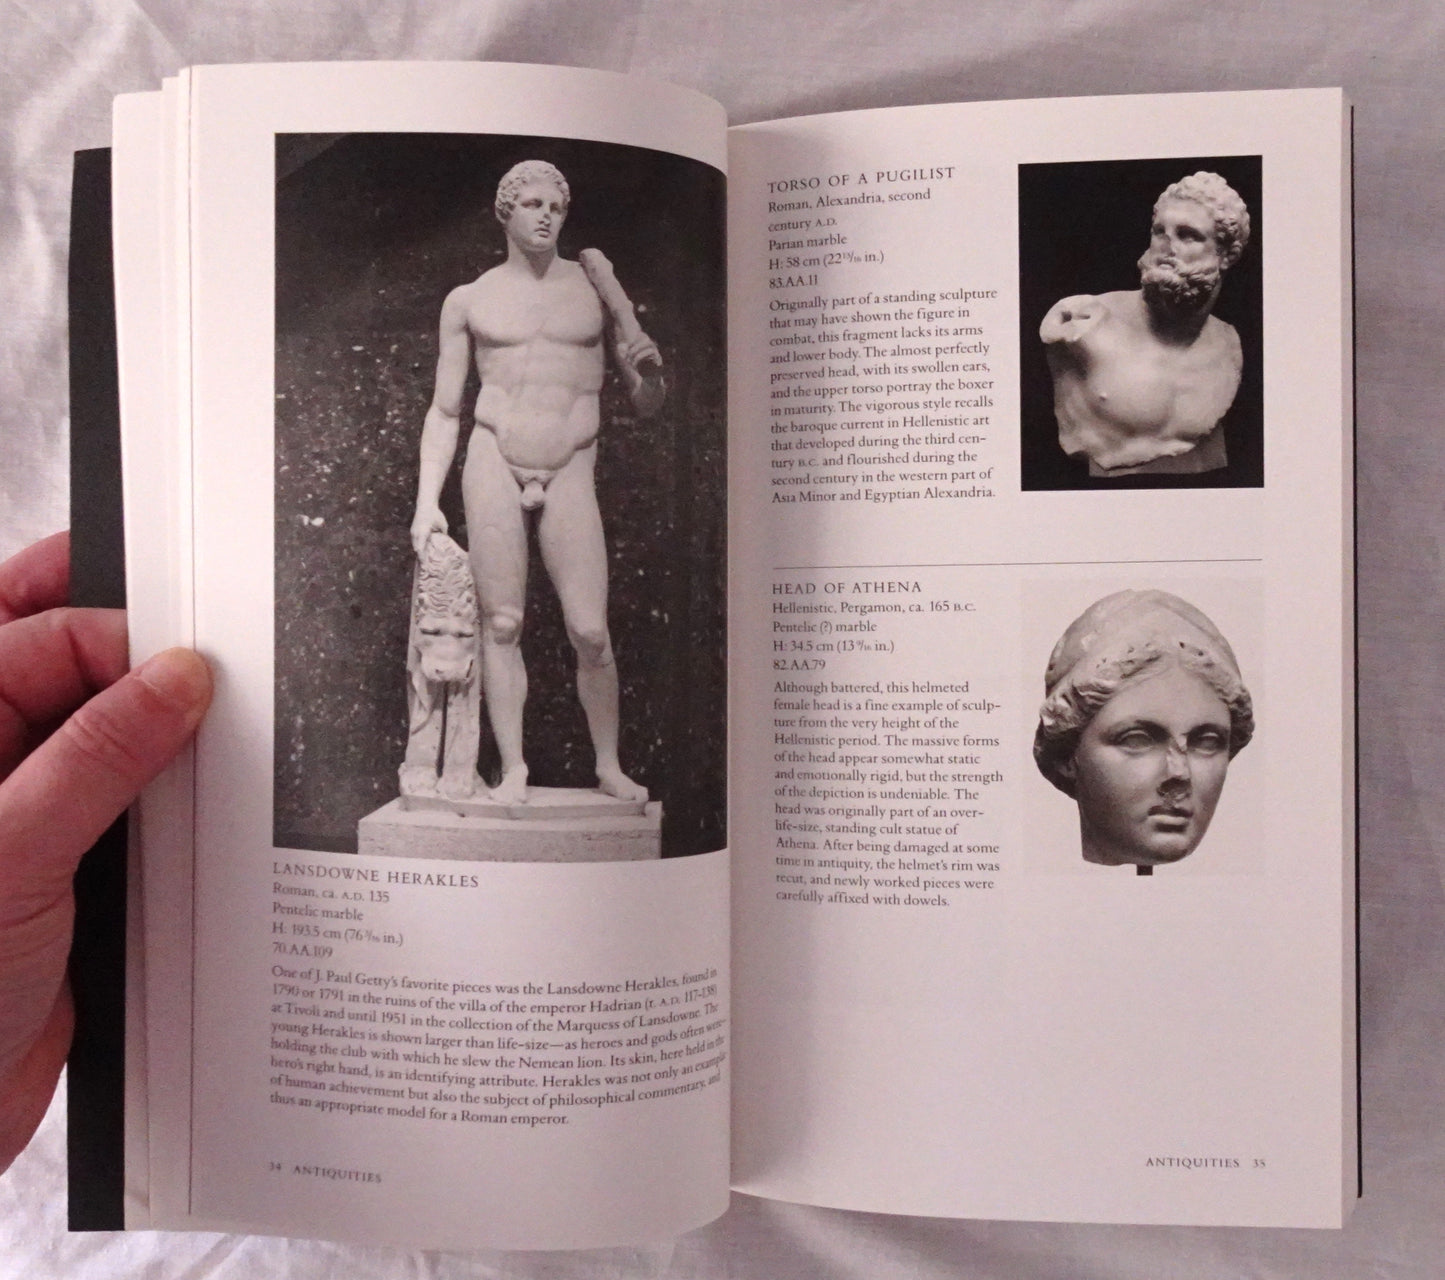 The J. Paul Getty Museum Handbook of the Collections